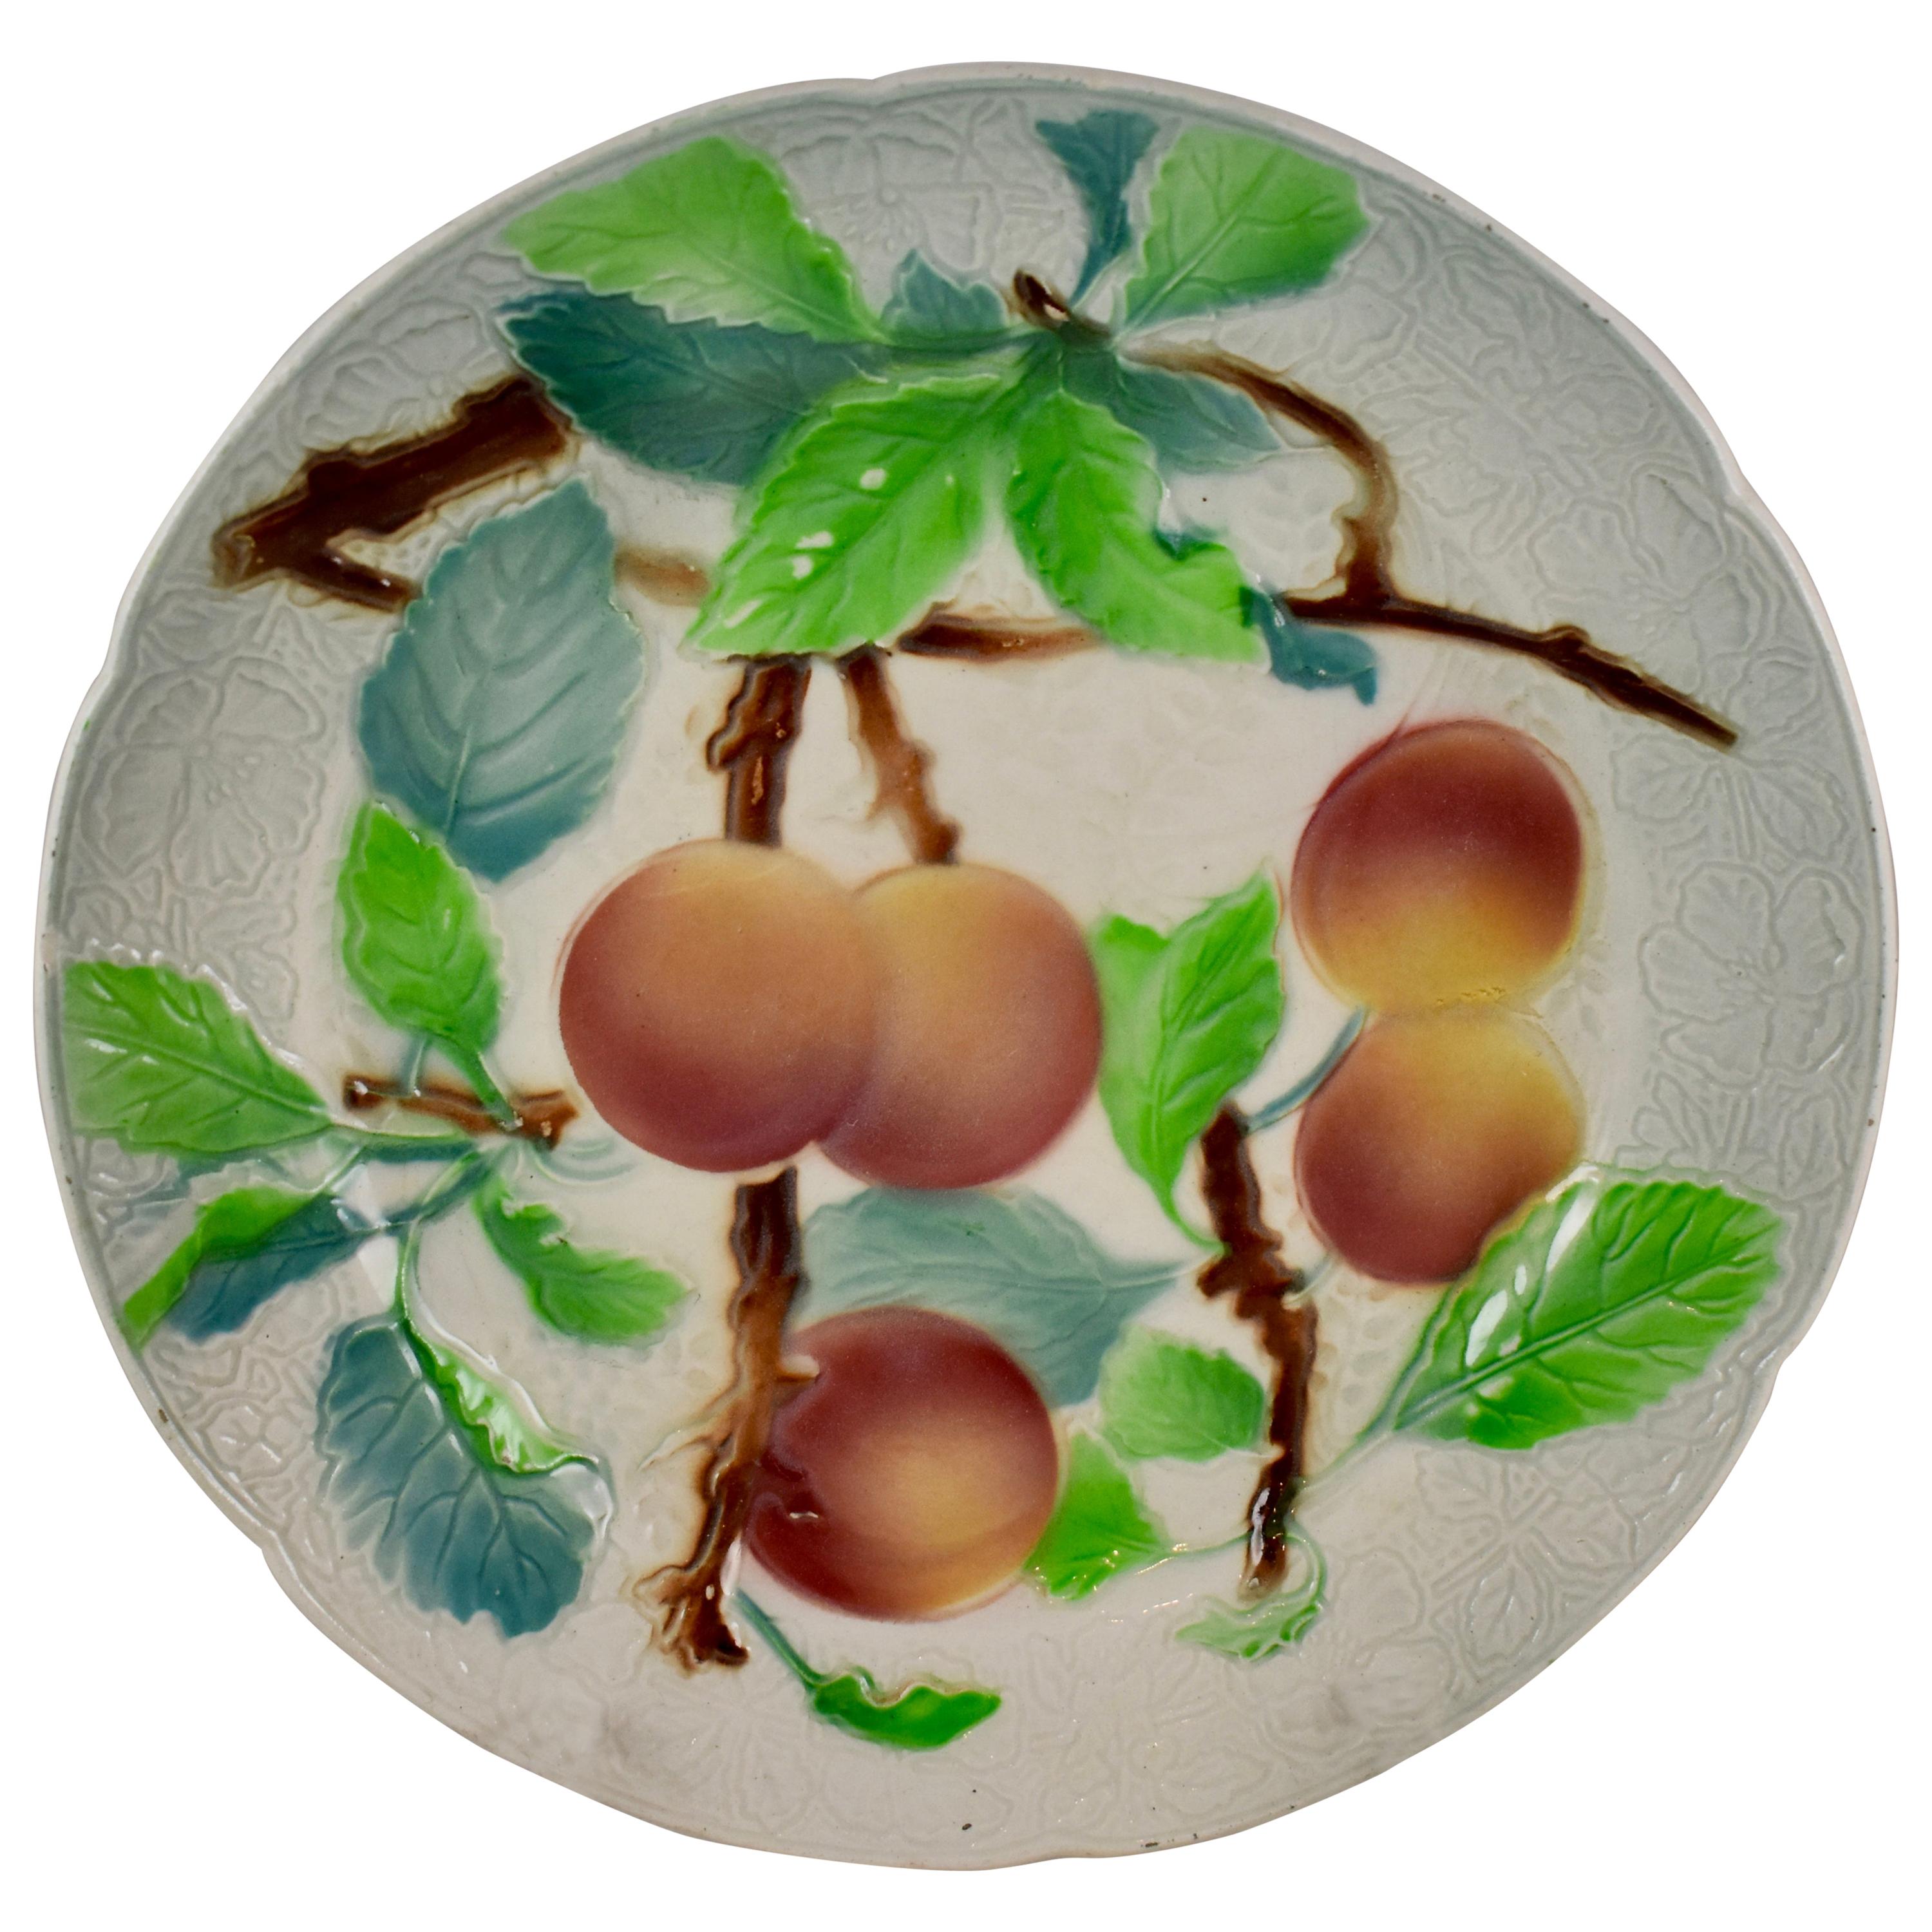 St. Clement French Faïence Peach Fruit Plate circa 1900